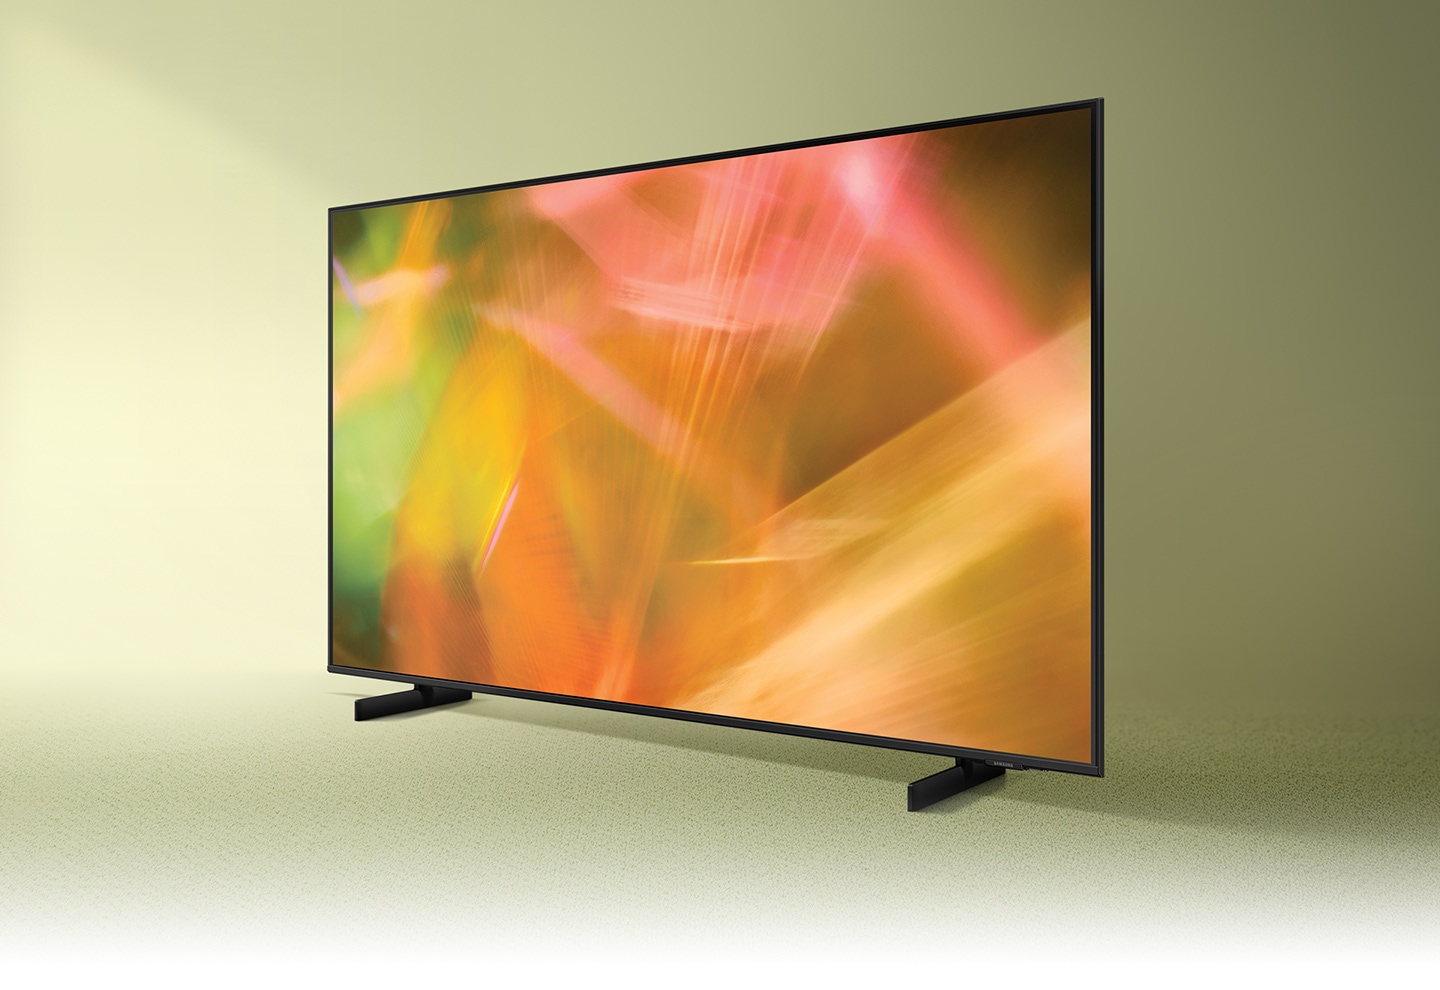 AU8000 displays intricately blended color graphics which demonstrate vivid crystal color.